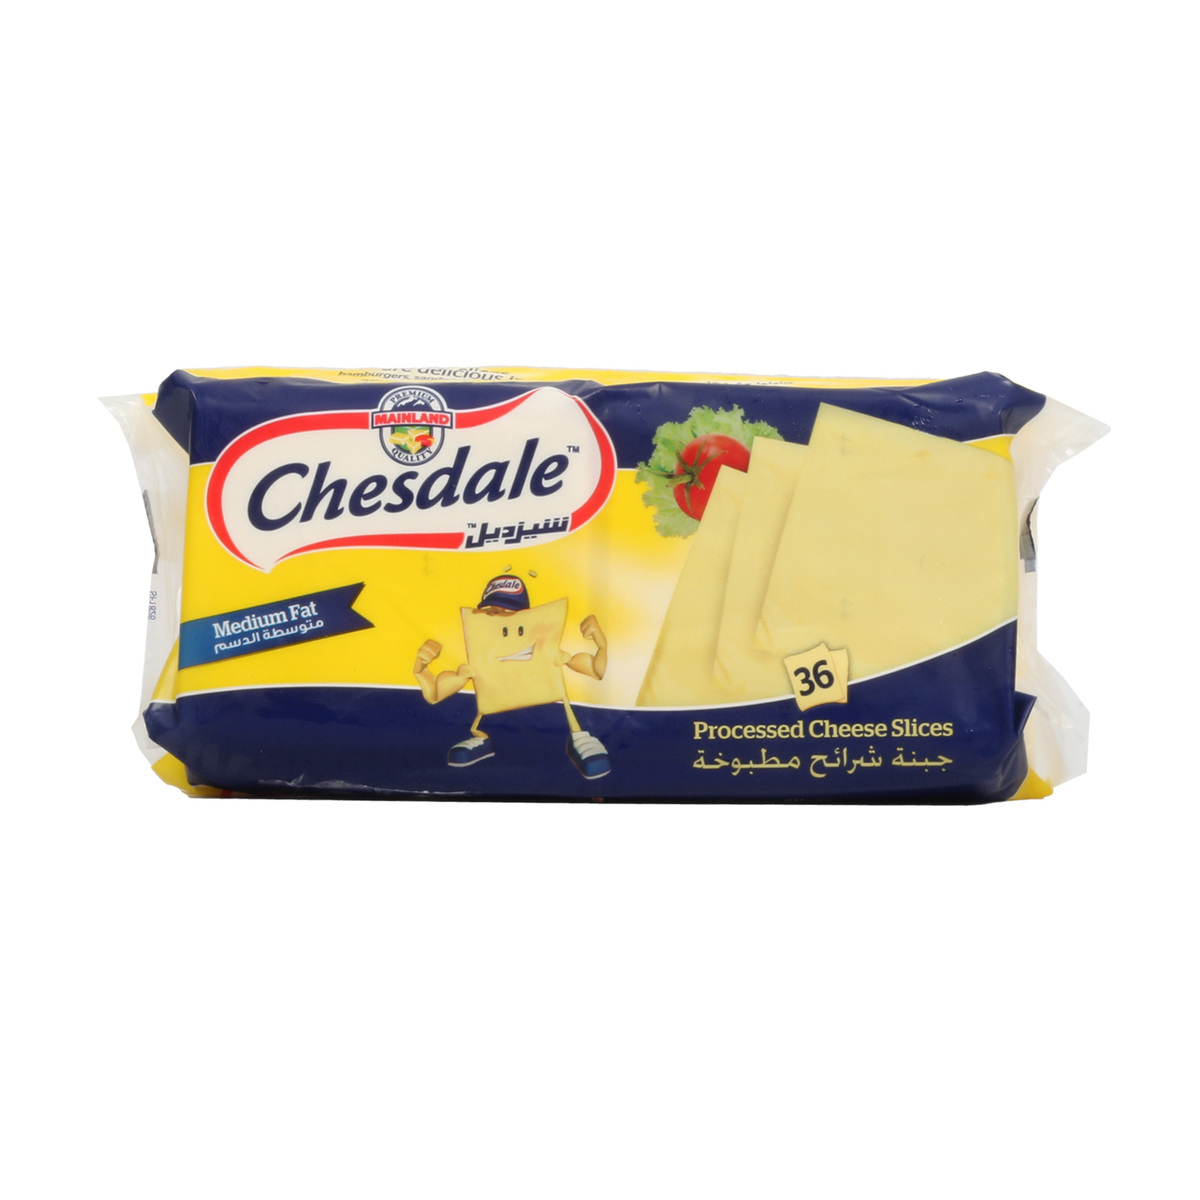 Anchor Chesdale Cheese Slices Value Pack 2 x 600g